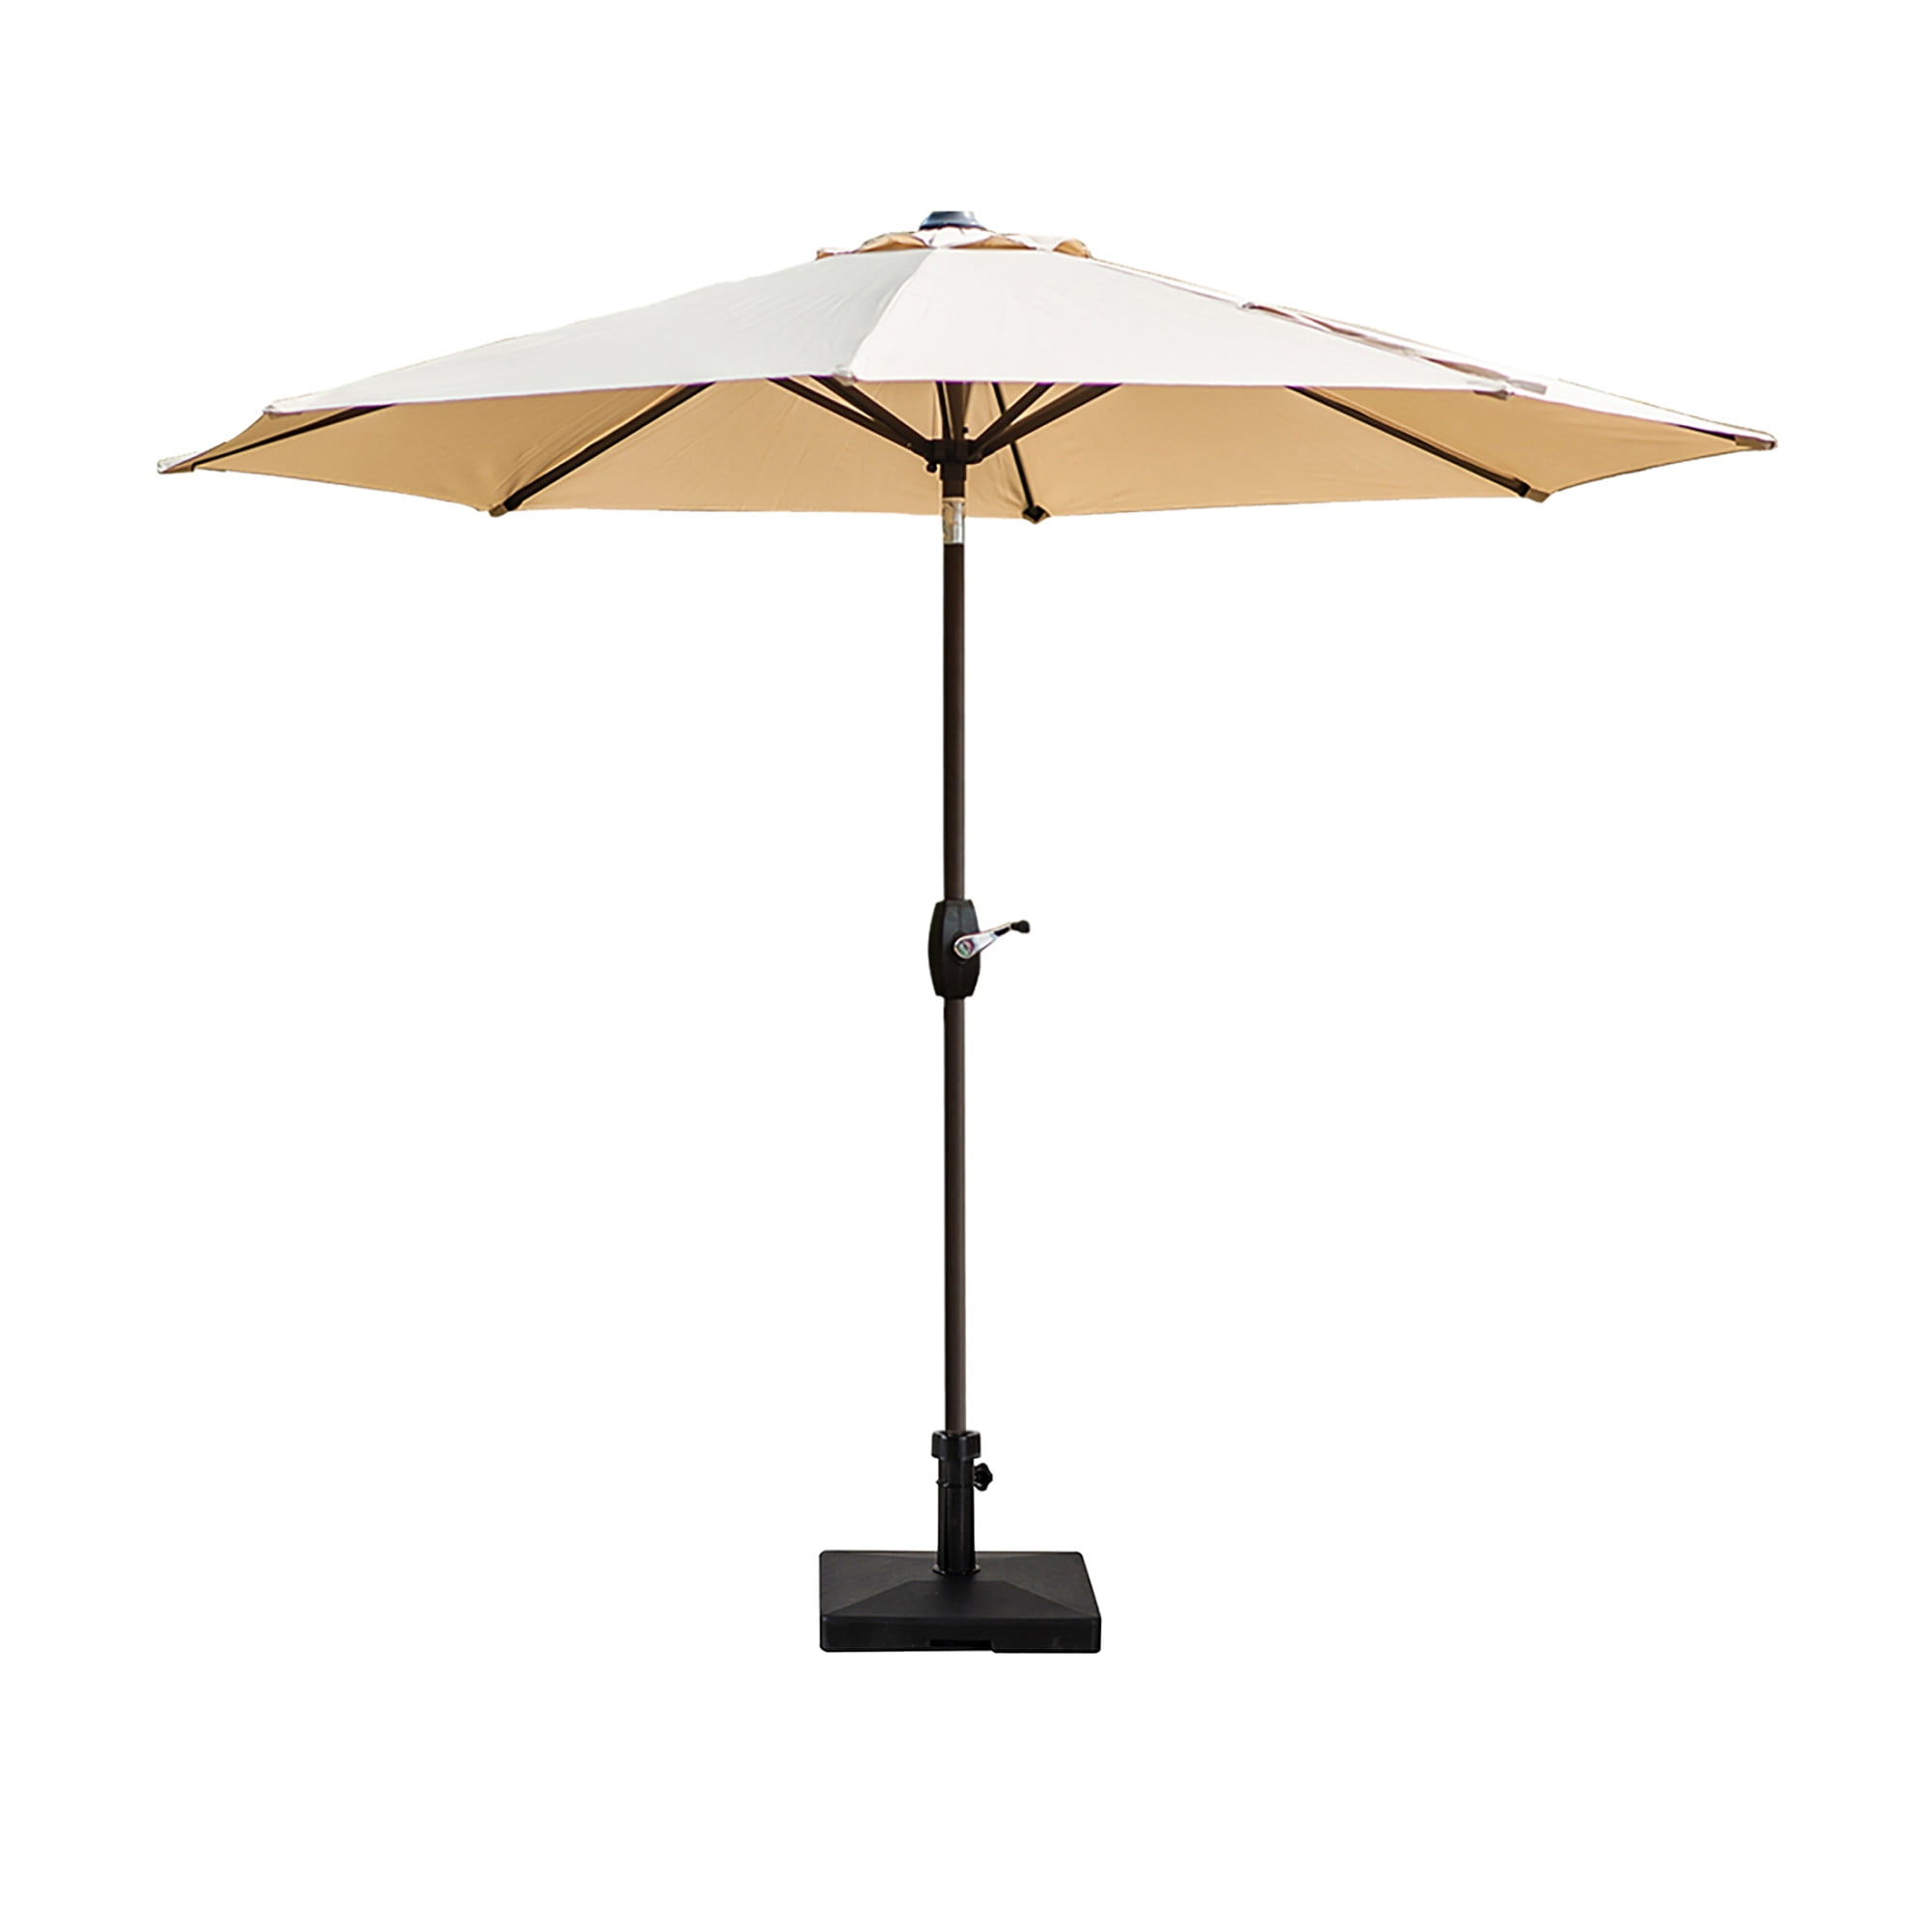 BE EVERY DAY 9FT OUTDOOR WATER/ UV RESISTANT MARKET PATIO UMBRELLA W/ CRA 50035 